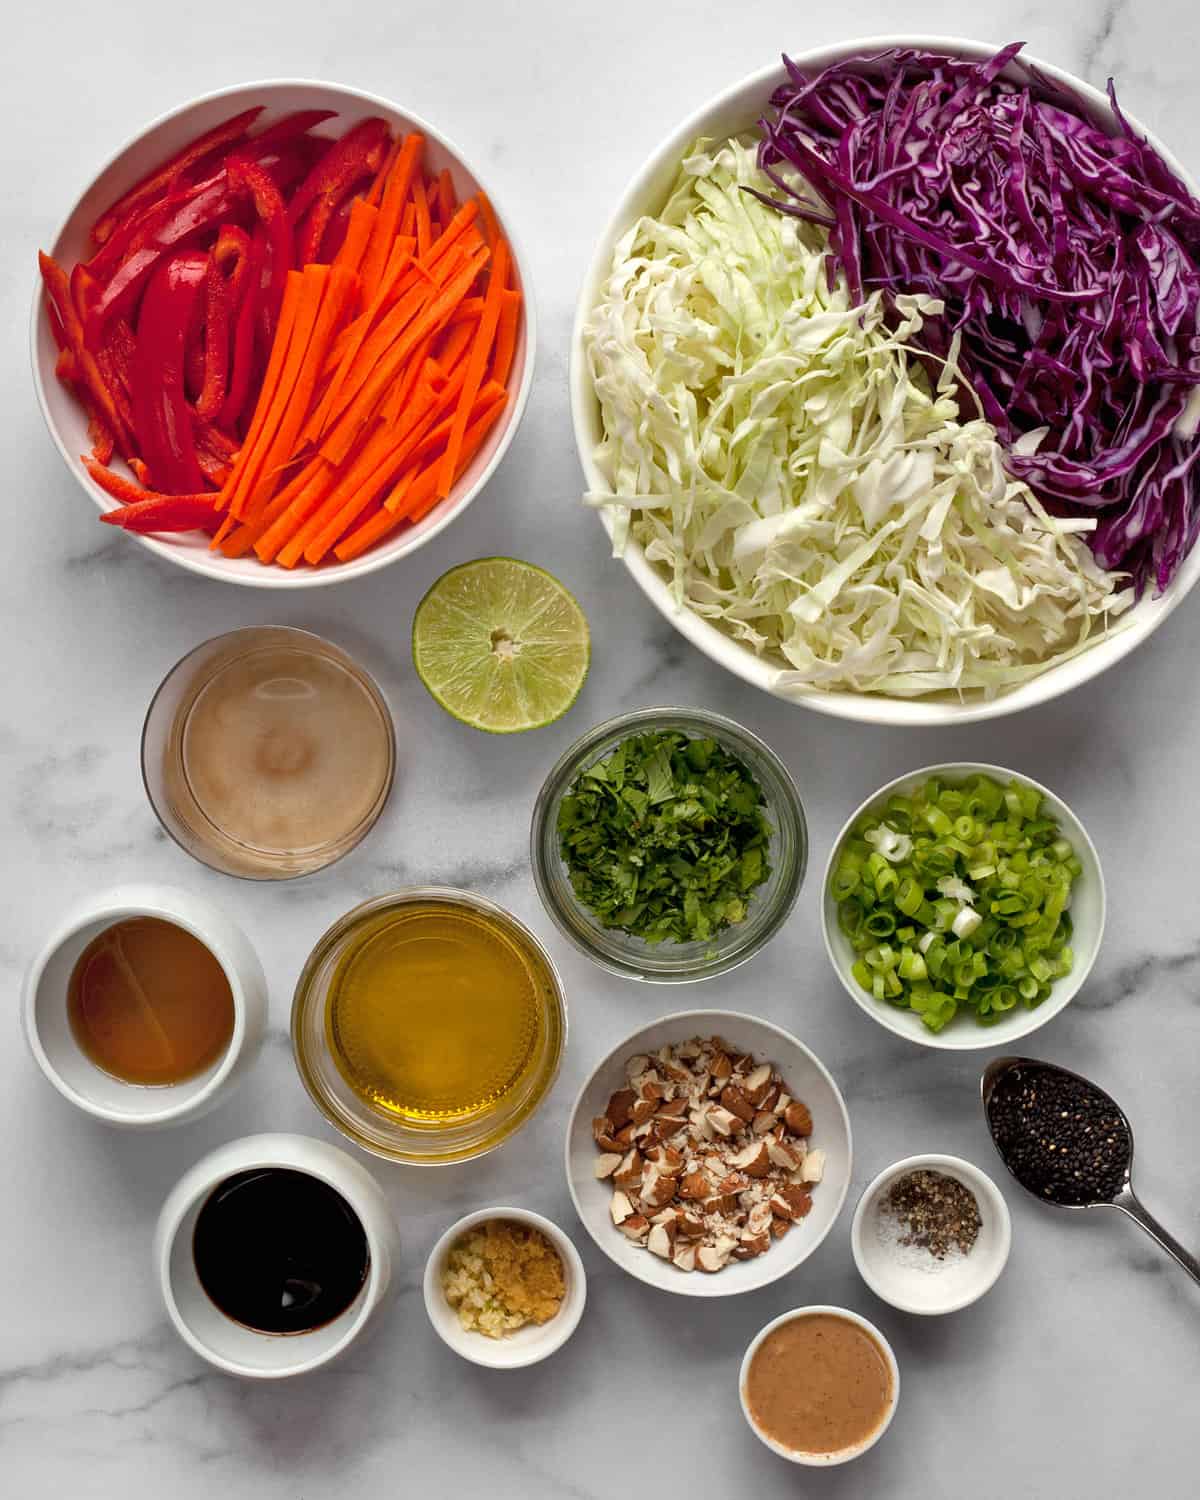 Ingredients including cabbage, carrots, peppers, cilantro, almonds, olive oil, soy sauce, sesame seeds, ginger and garlic.